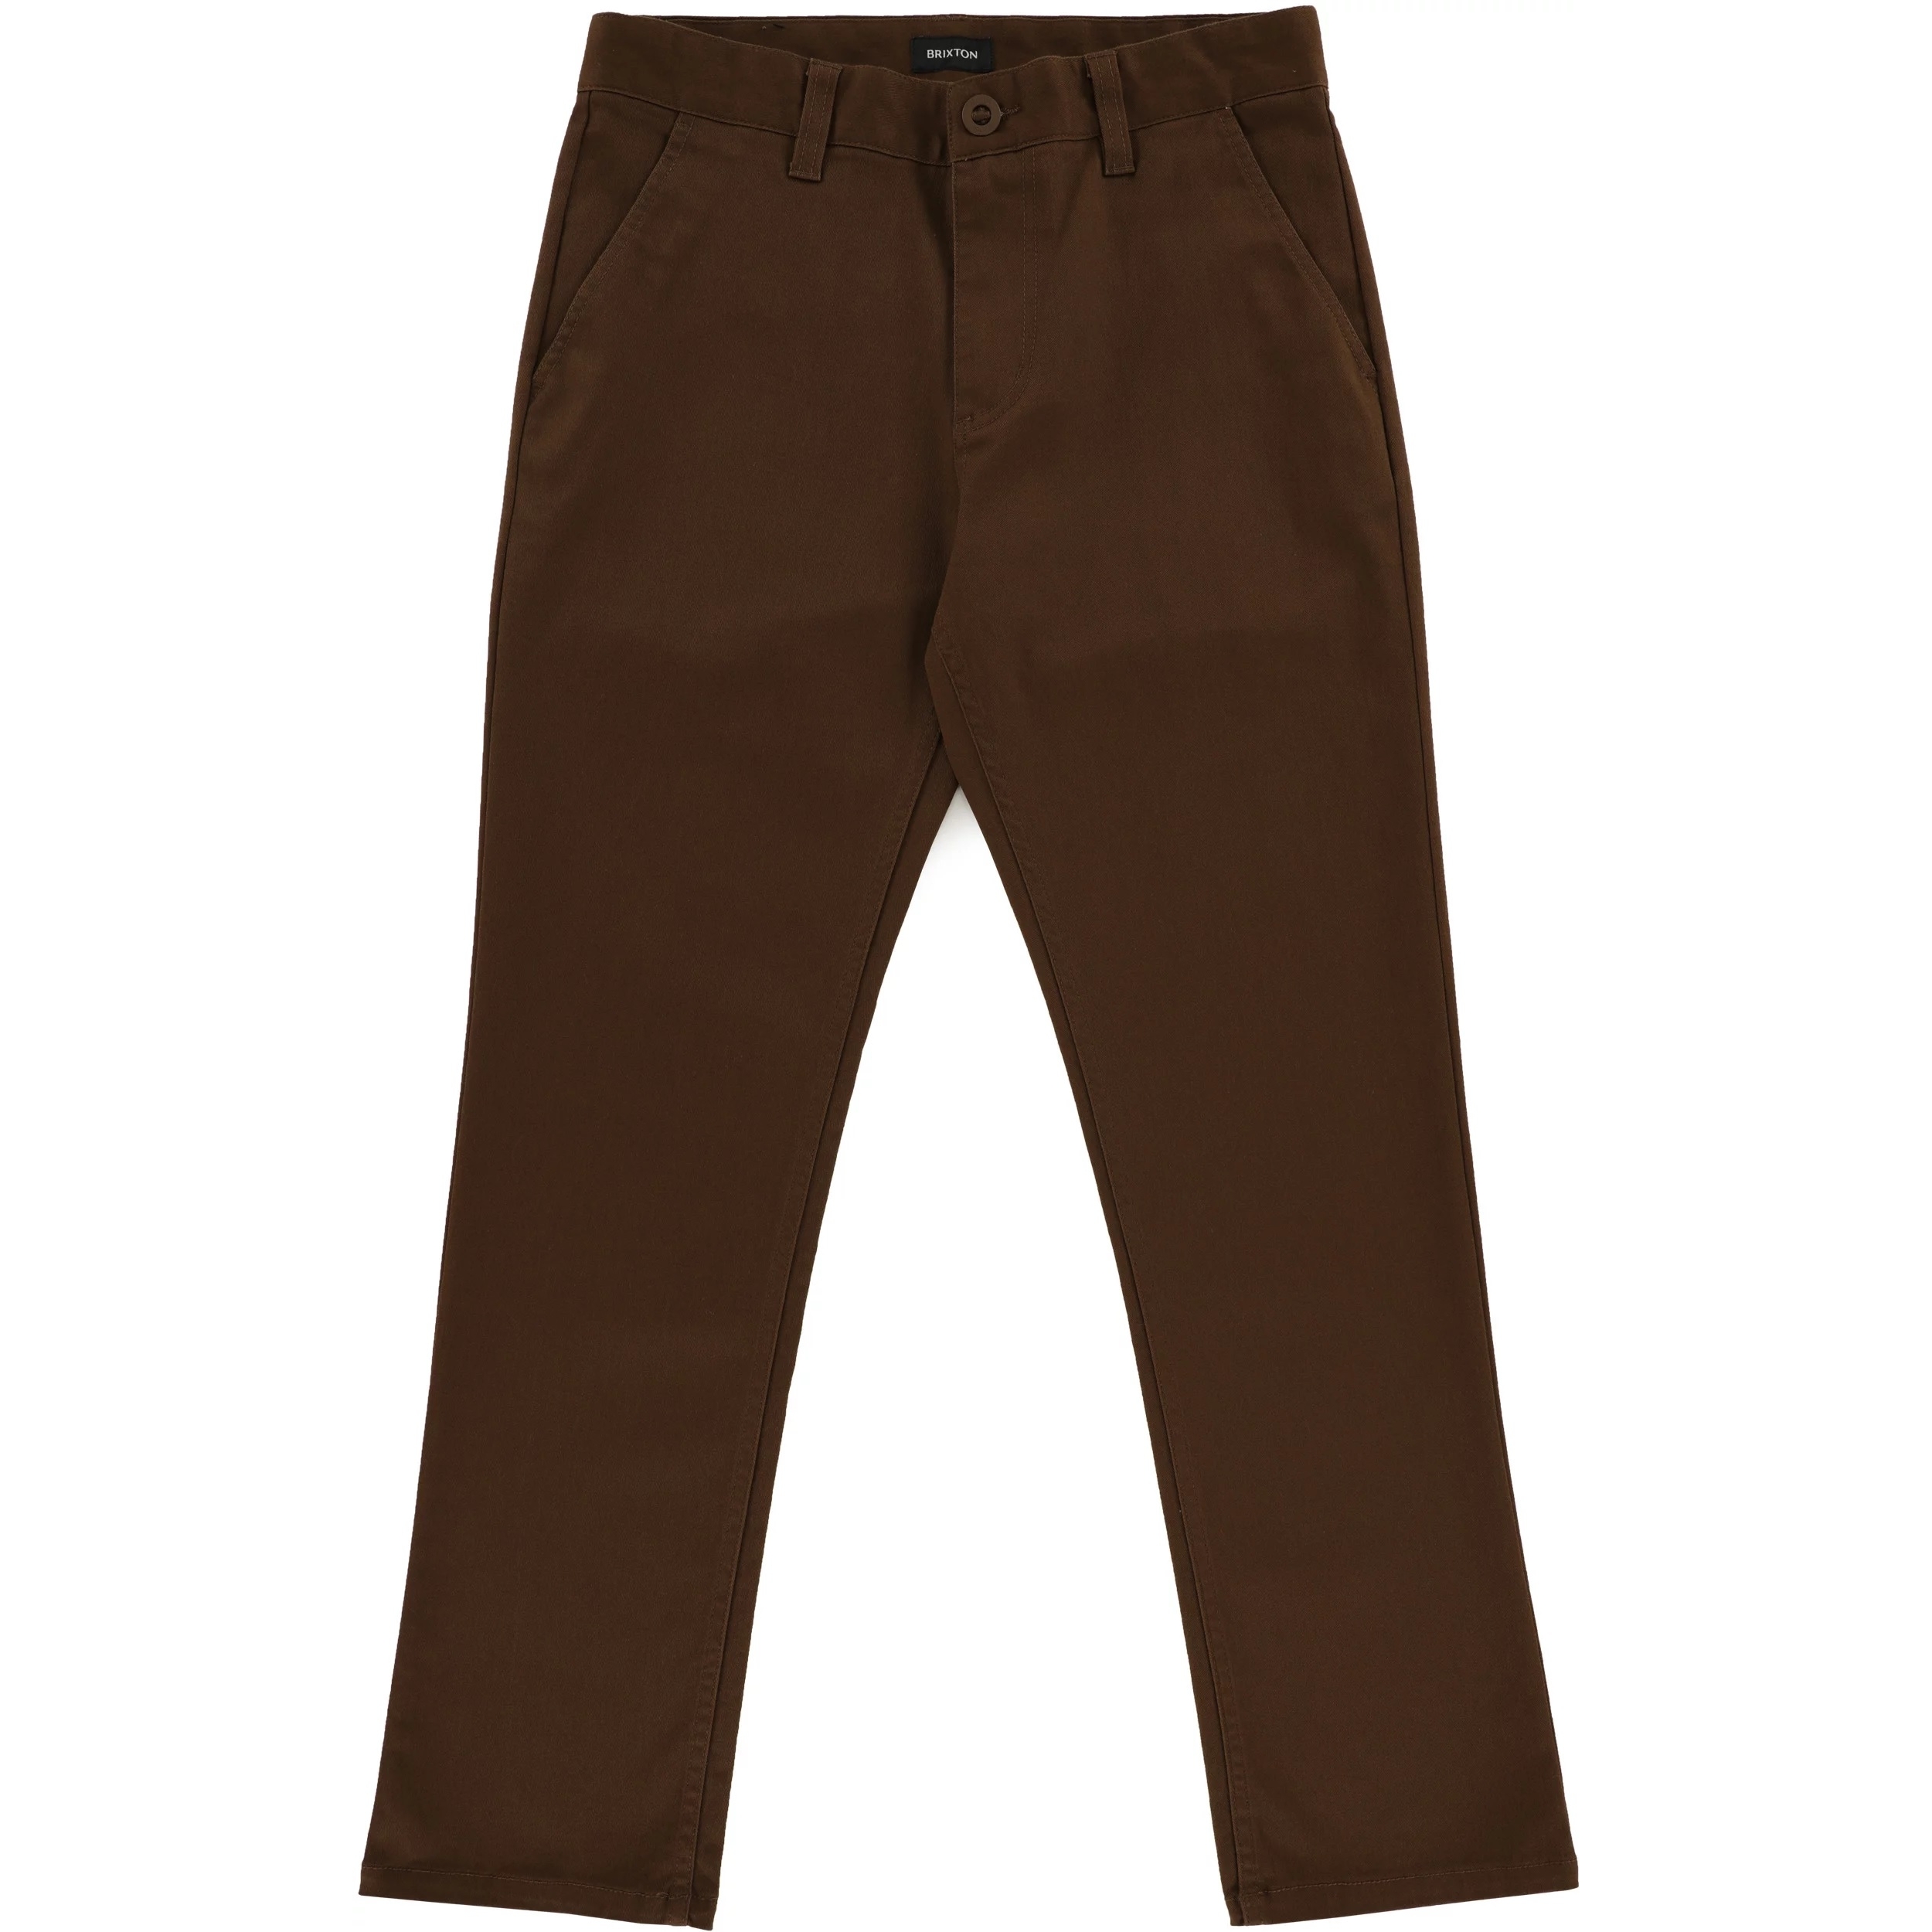 Choice Chino Relaxed Pant (Desert Palm)